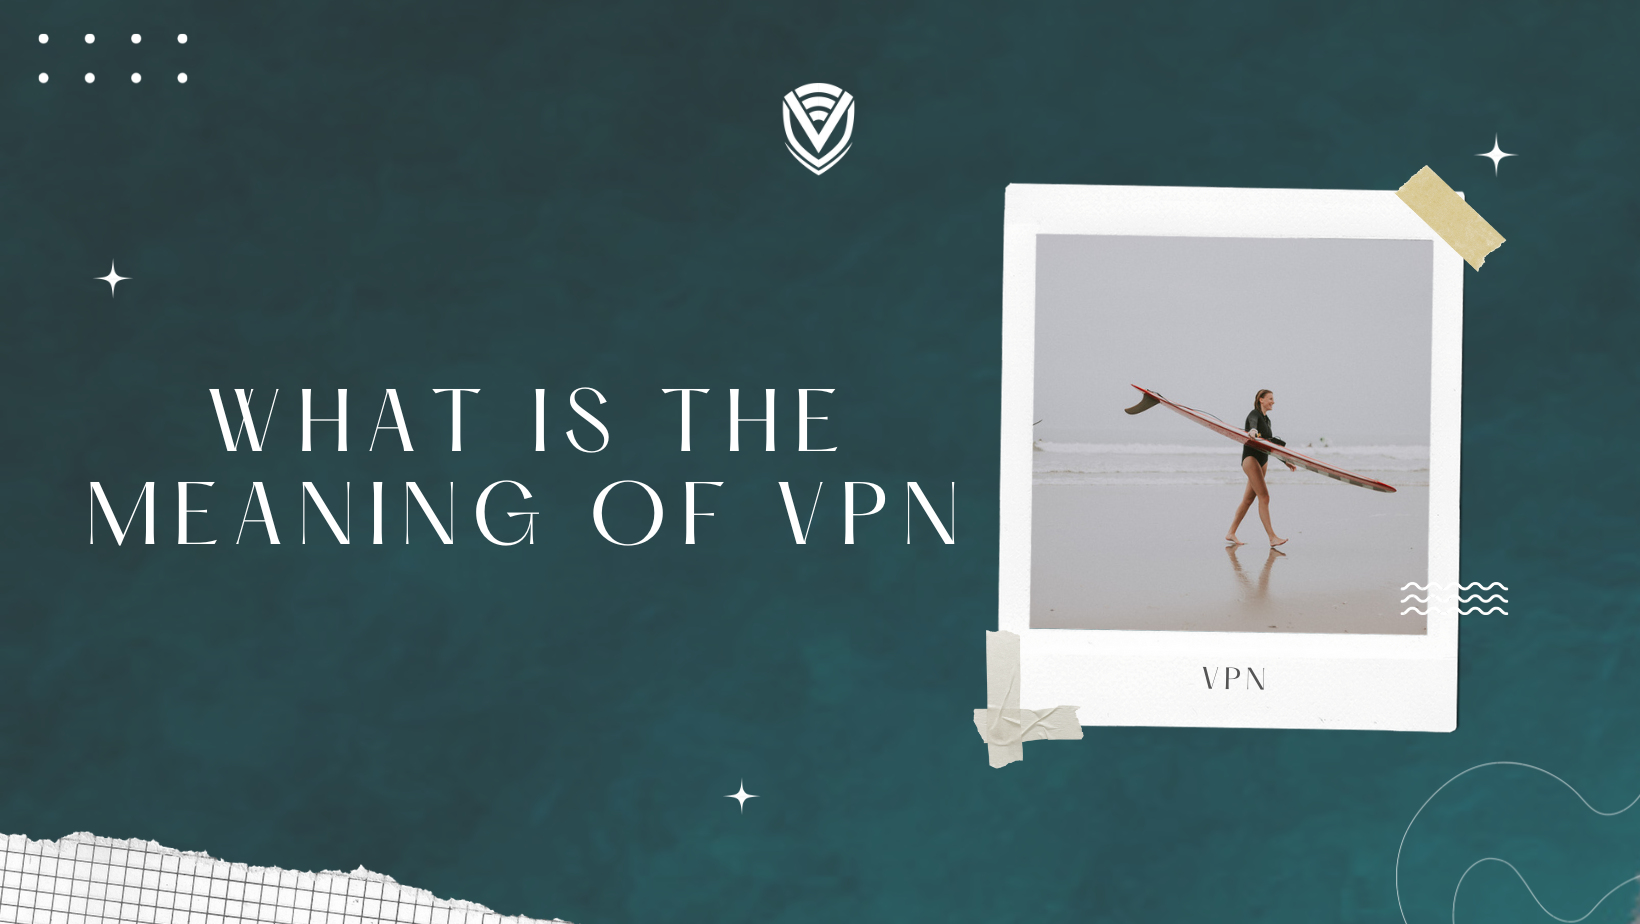 What Is VPN And What Does It Stand For?